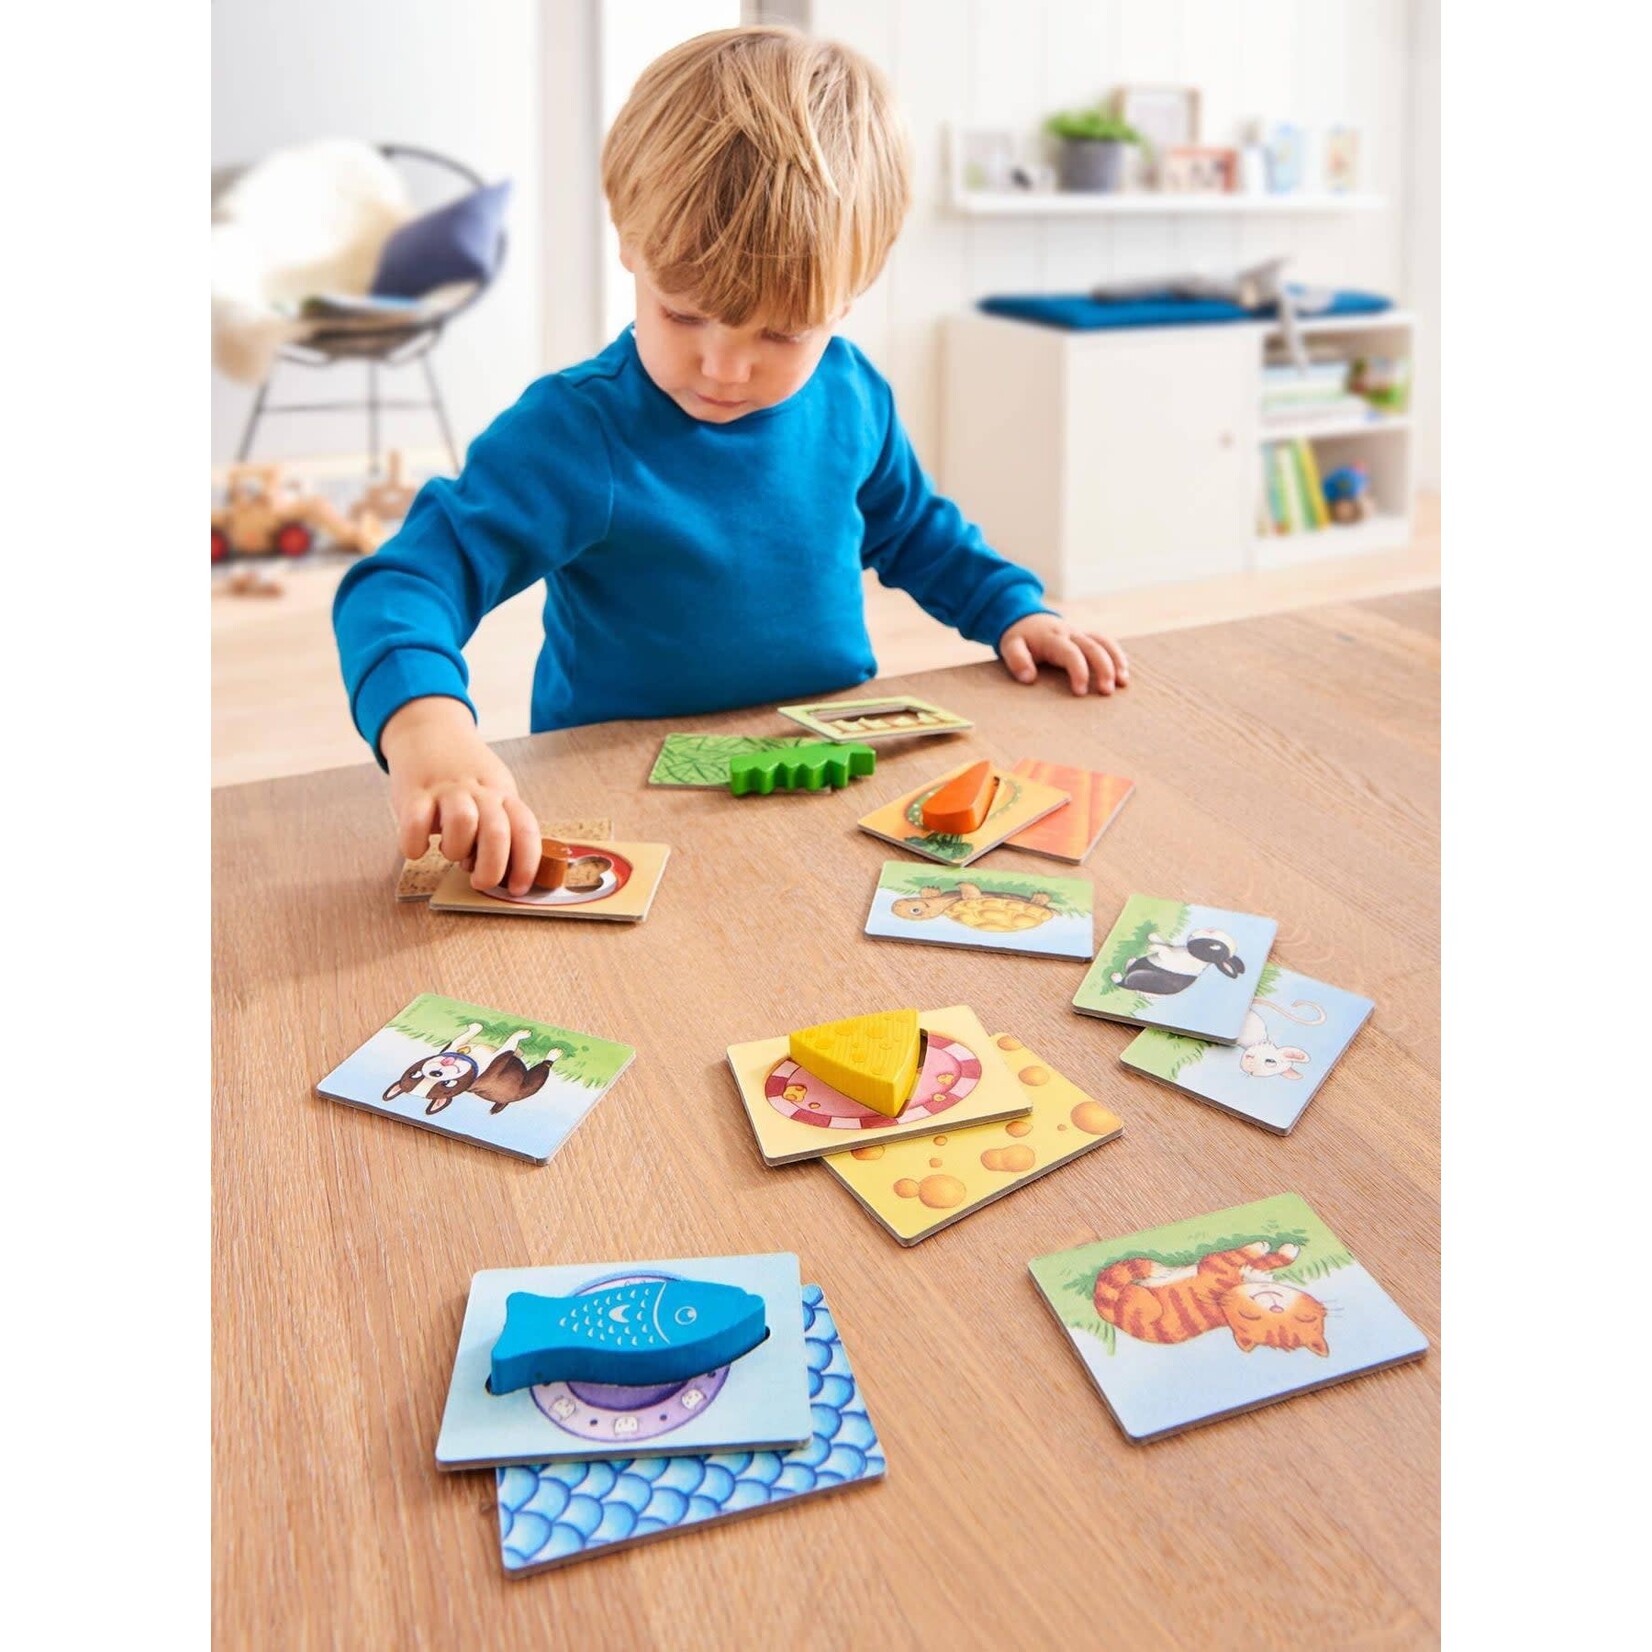 Haba My Very First Games: Nibble Munch Crunch